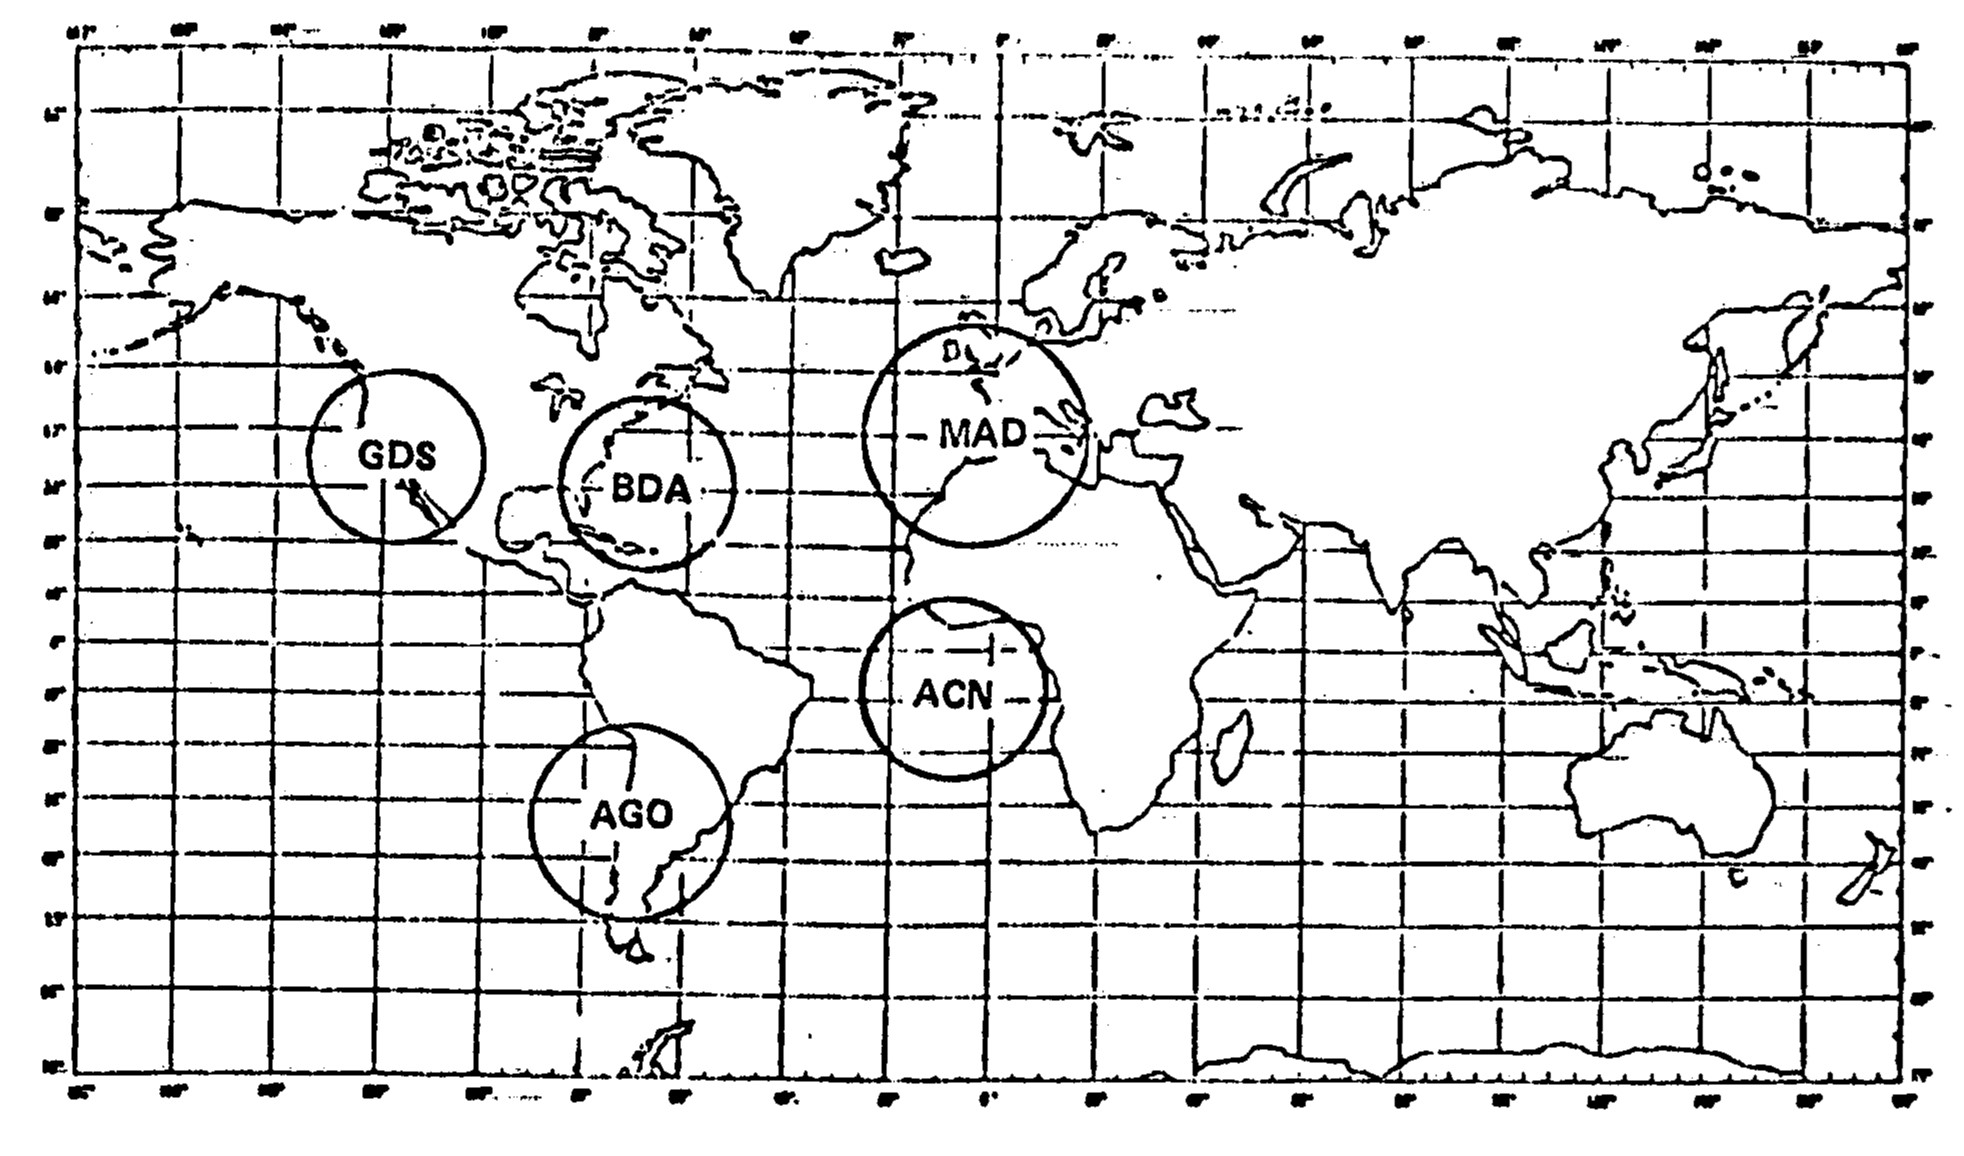 Ground track of Skylab’s final orbit and the debris footprint in the Indian Ocean and Australia